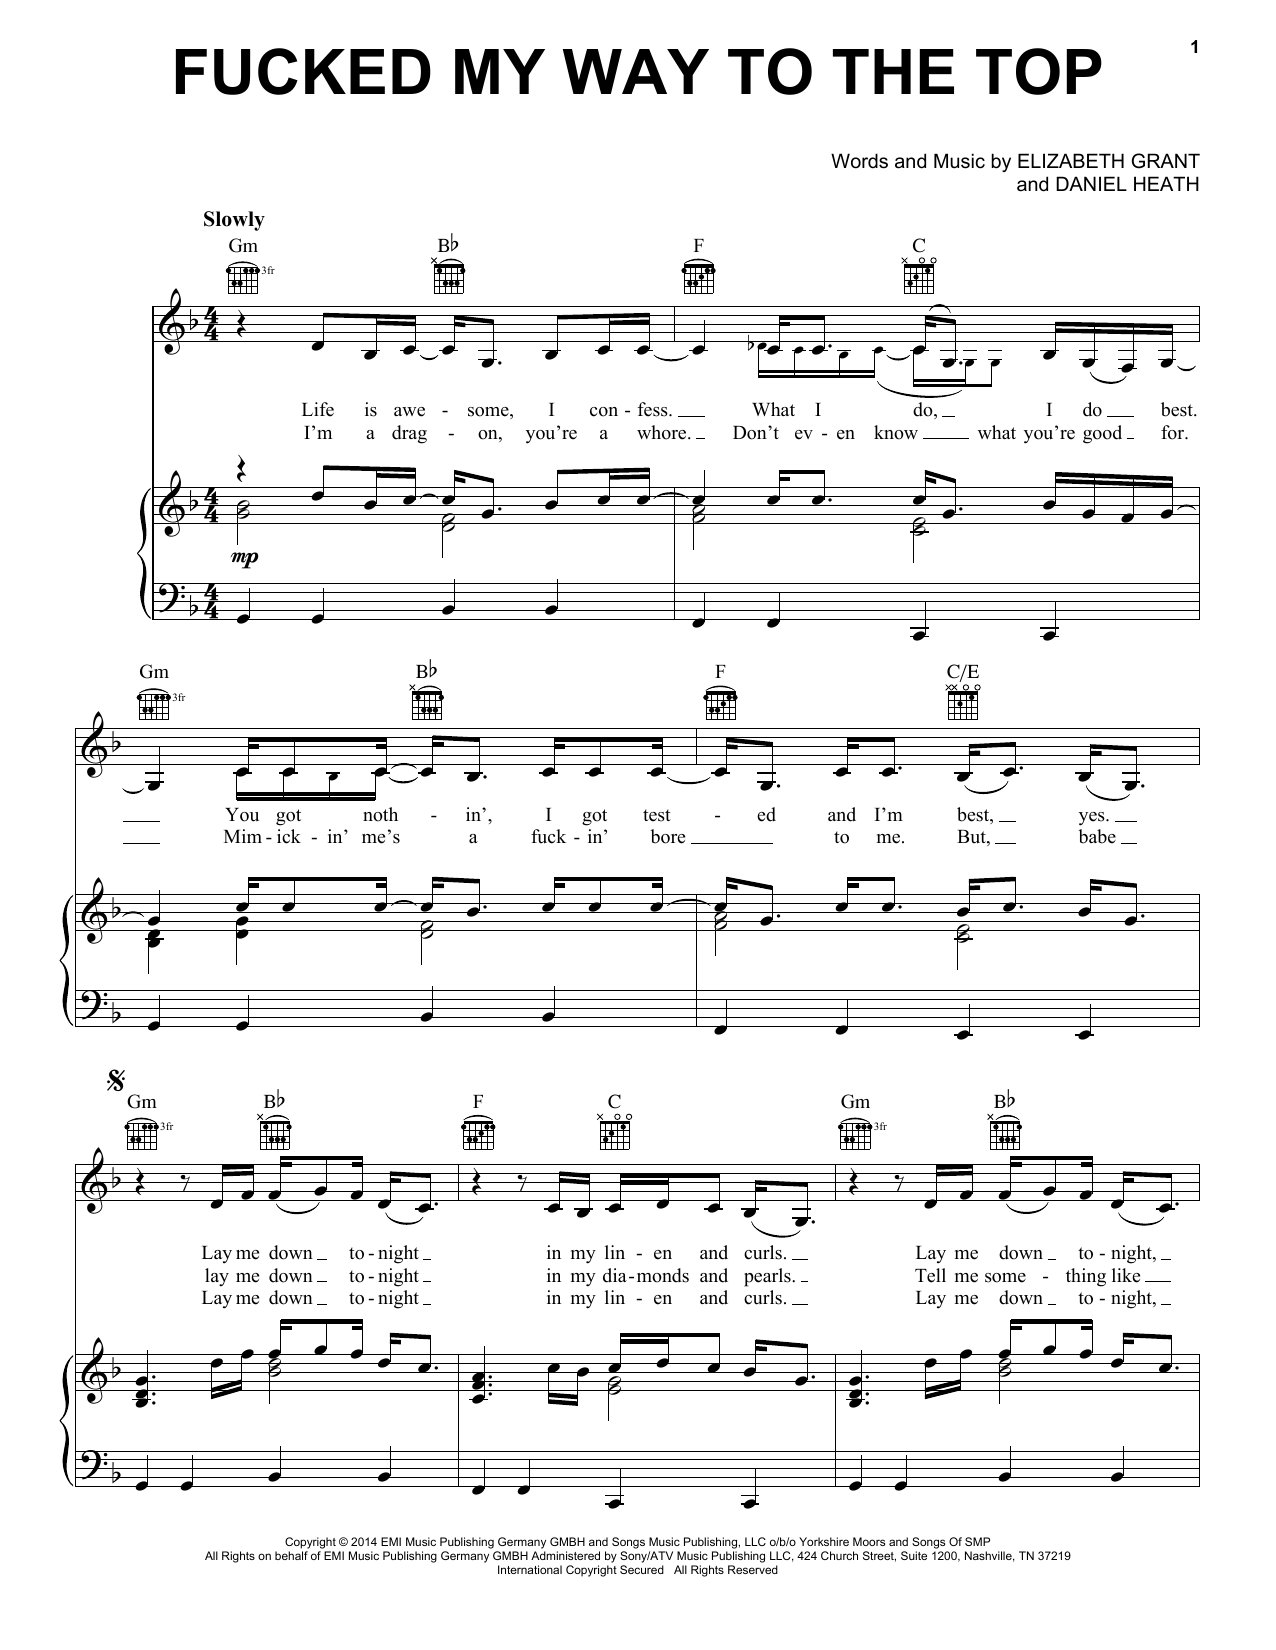 Download Lana Del Rey Fucked My Way Up To The Top Sheet Music